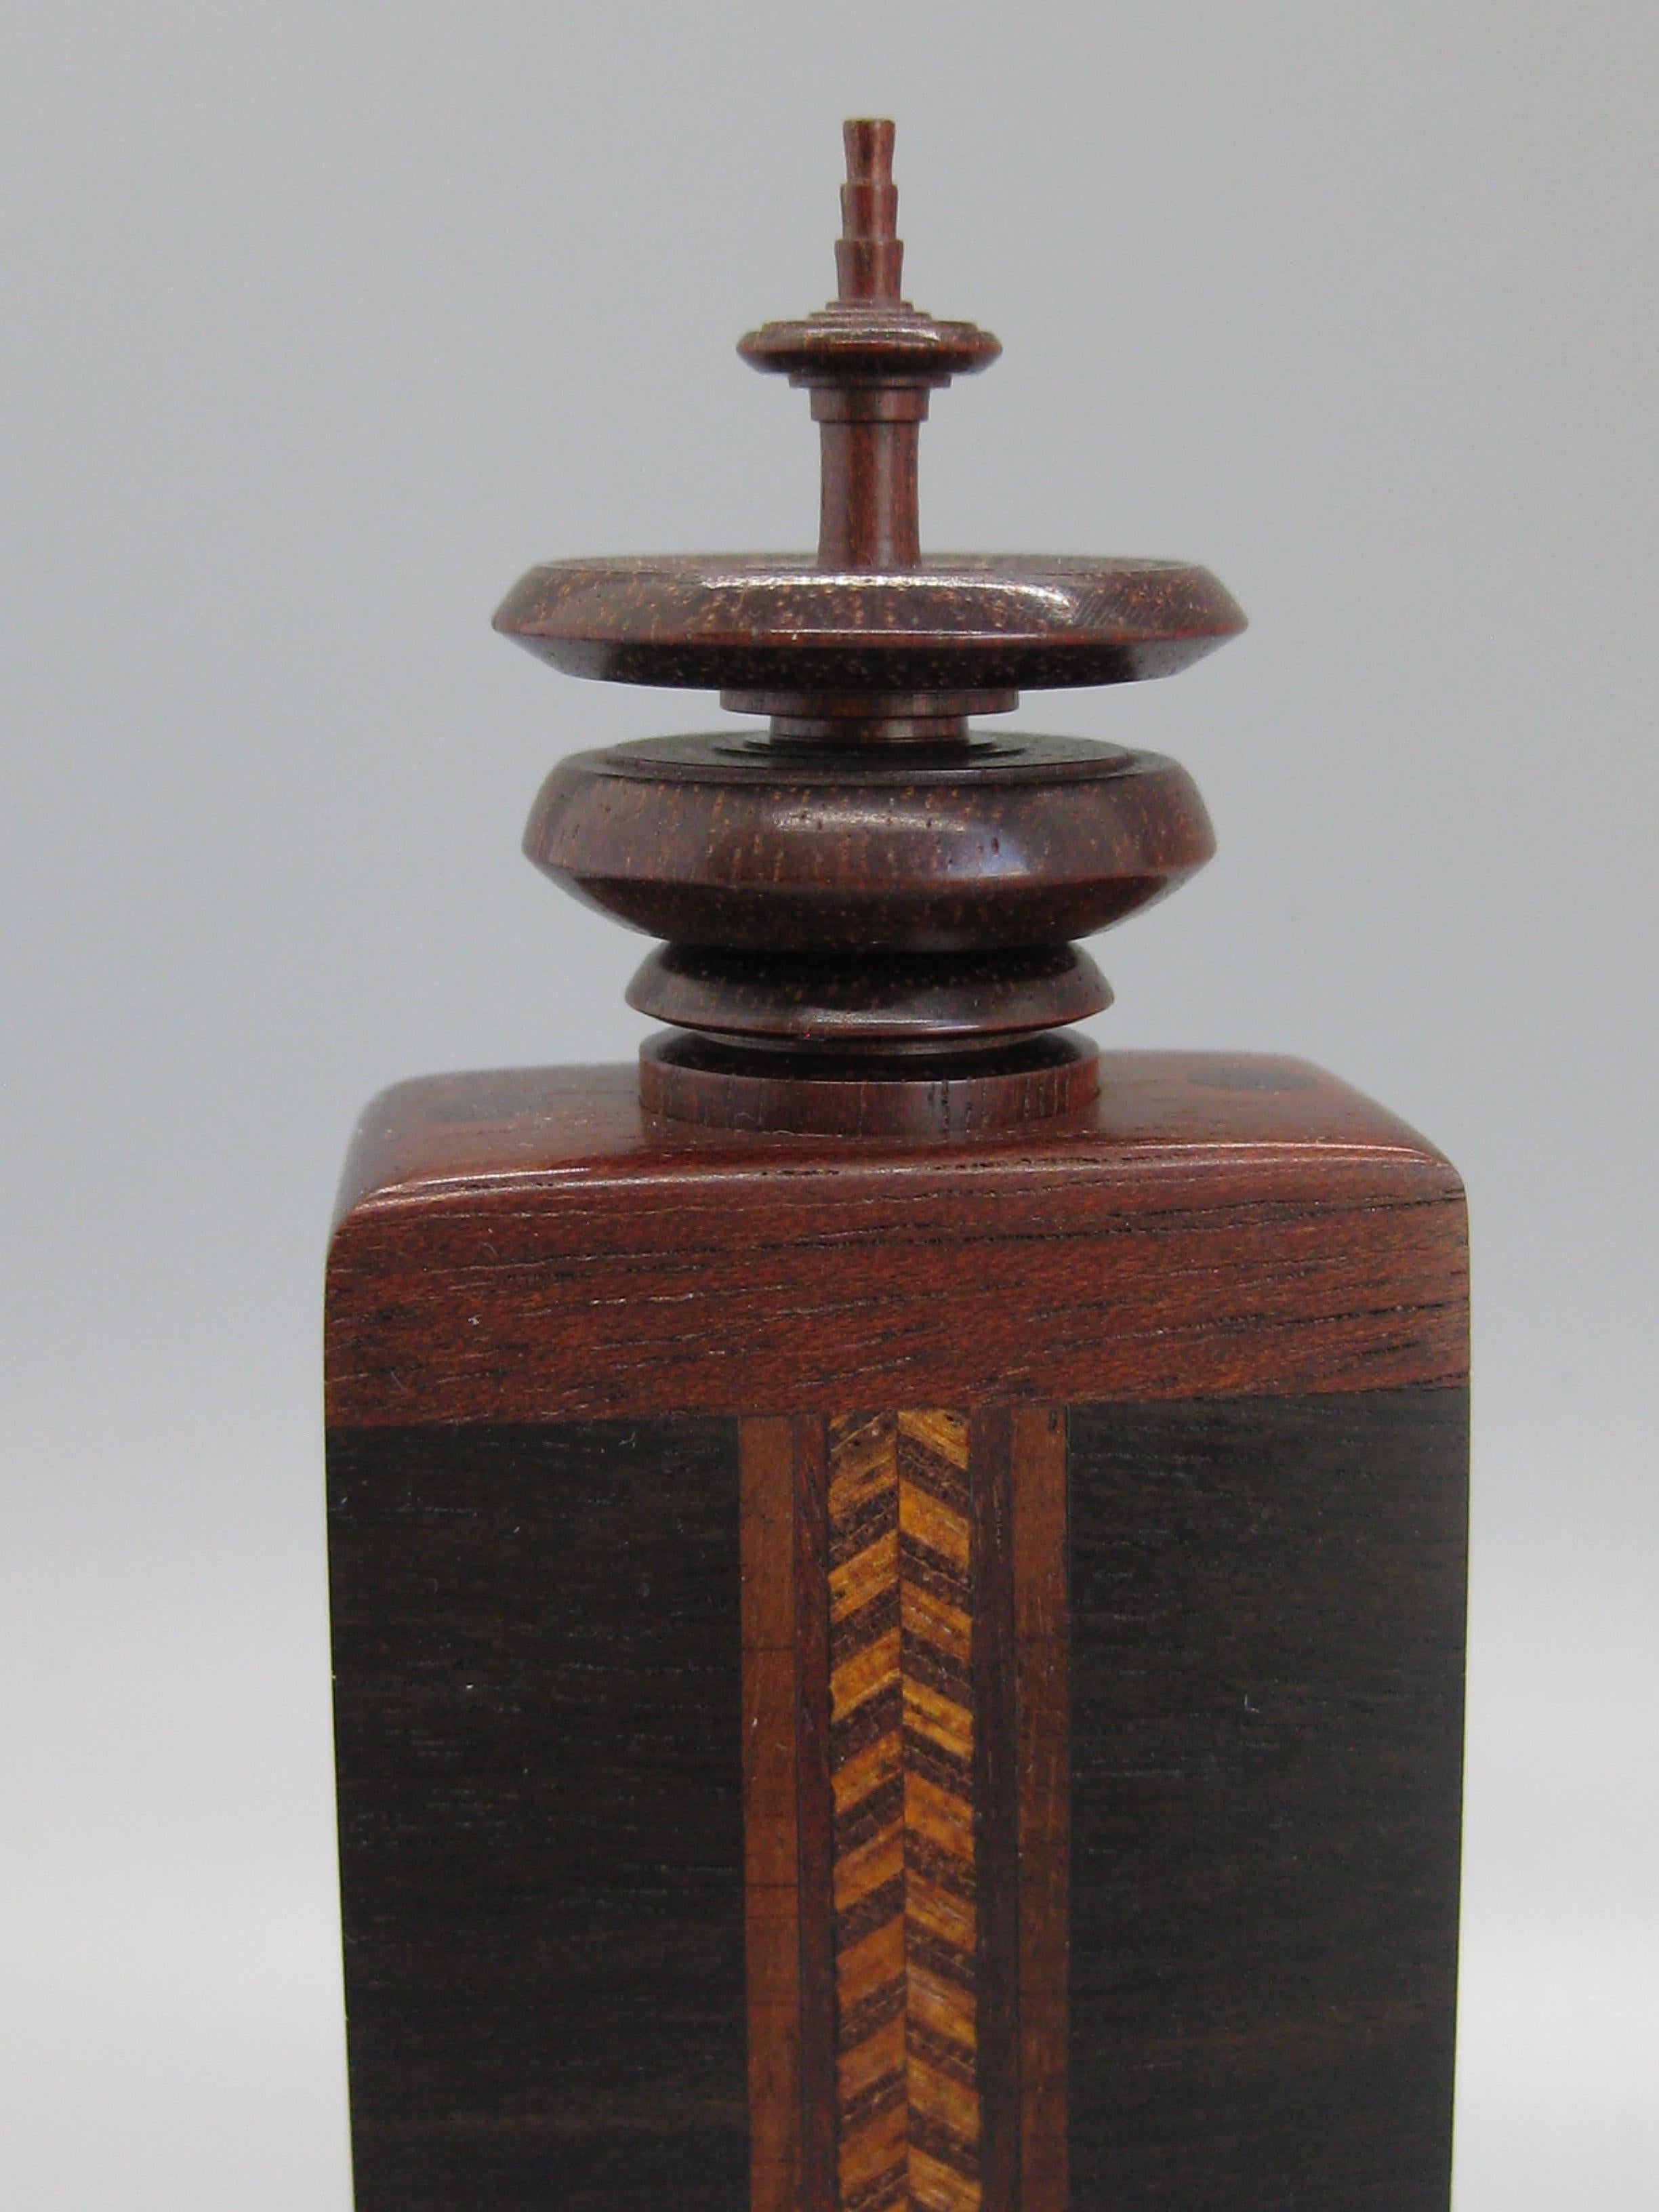 Wonderful handcrafted wooden perfume bottle/stash box made by California Artist Stephen Mark Paulsen. It dates from 1981. Signed by the artist on the bottom. Made of mainly cocobolo wood and rosewood. Top is turned and has a glass bottle inside. His